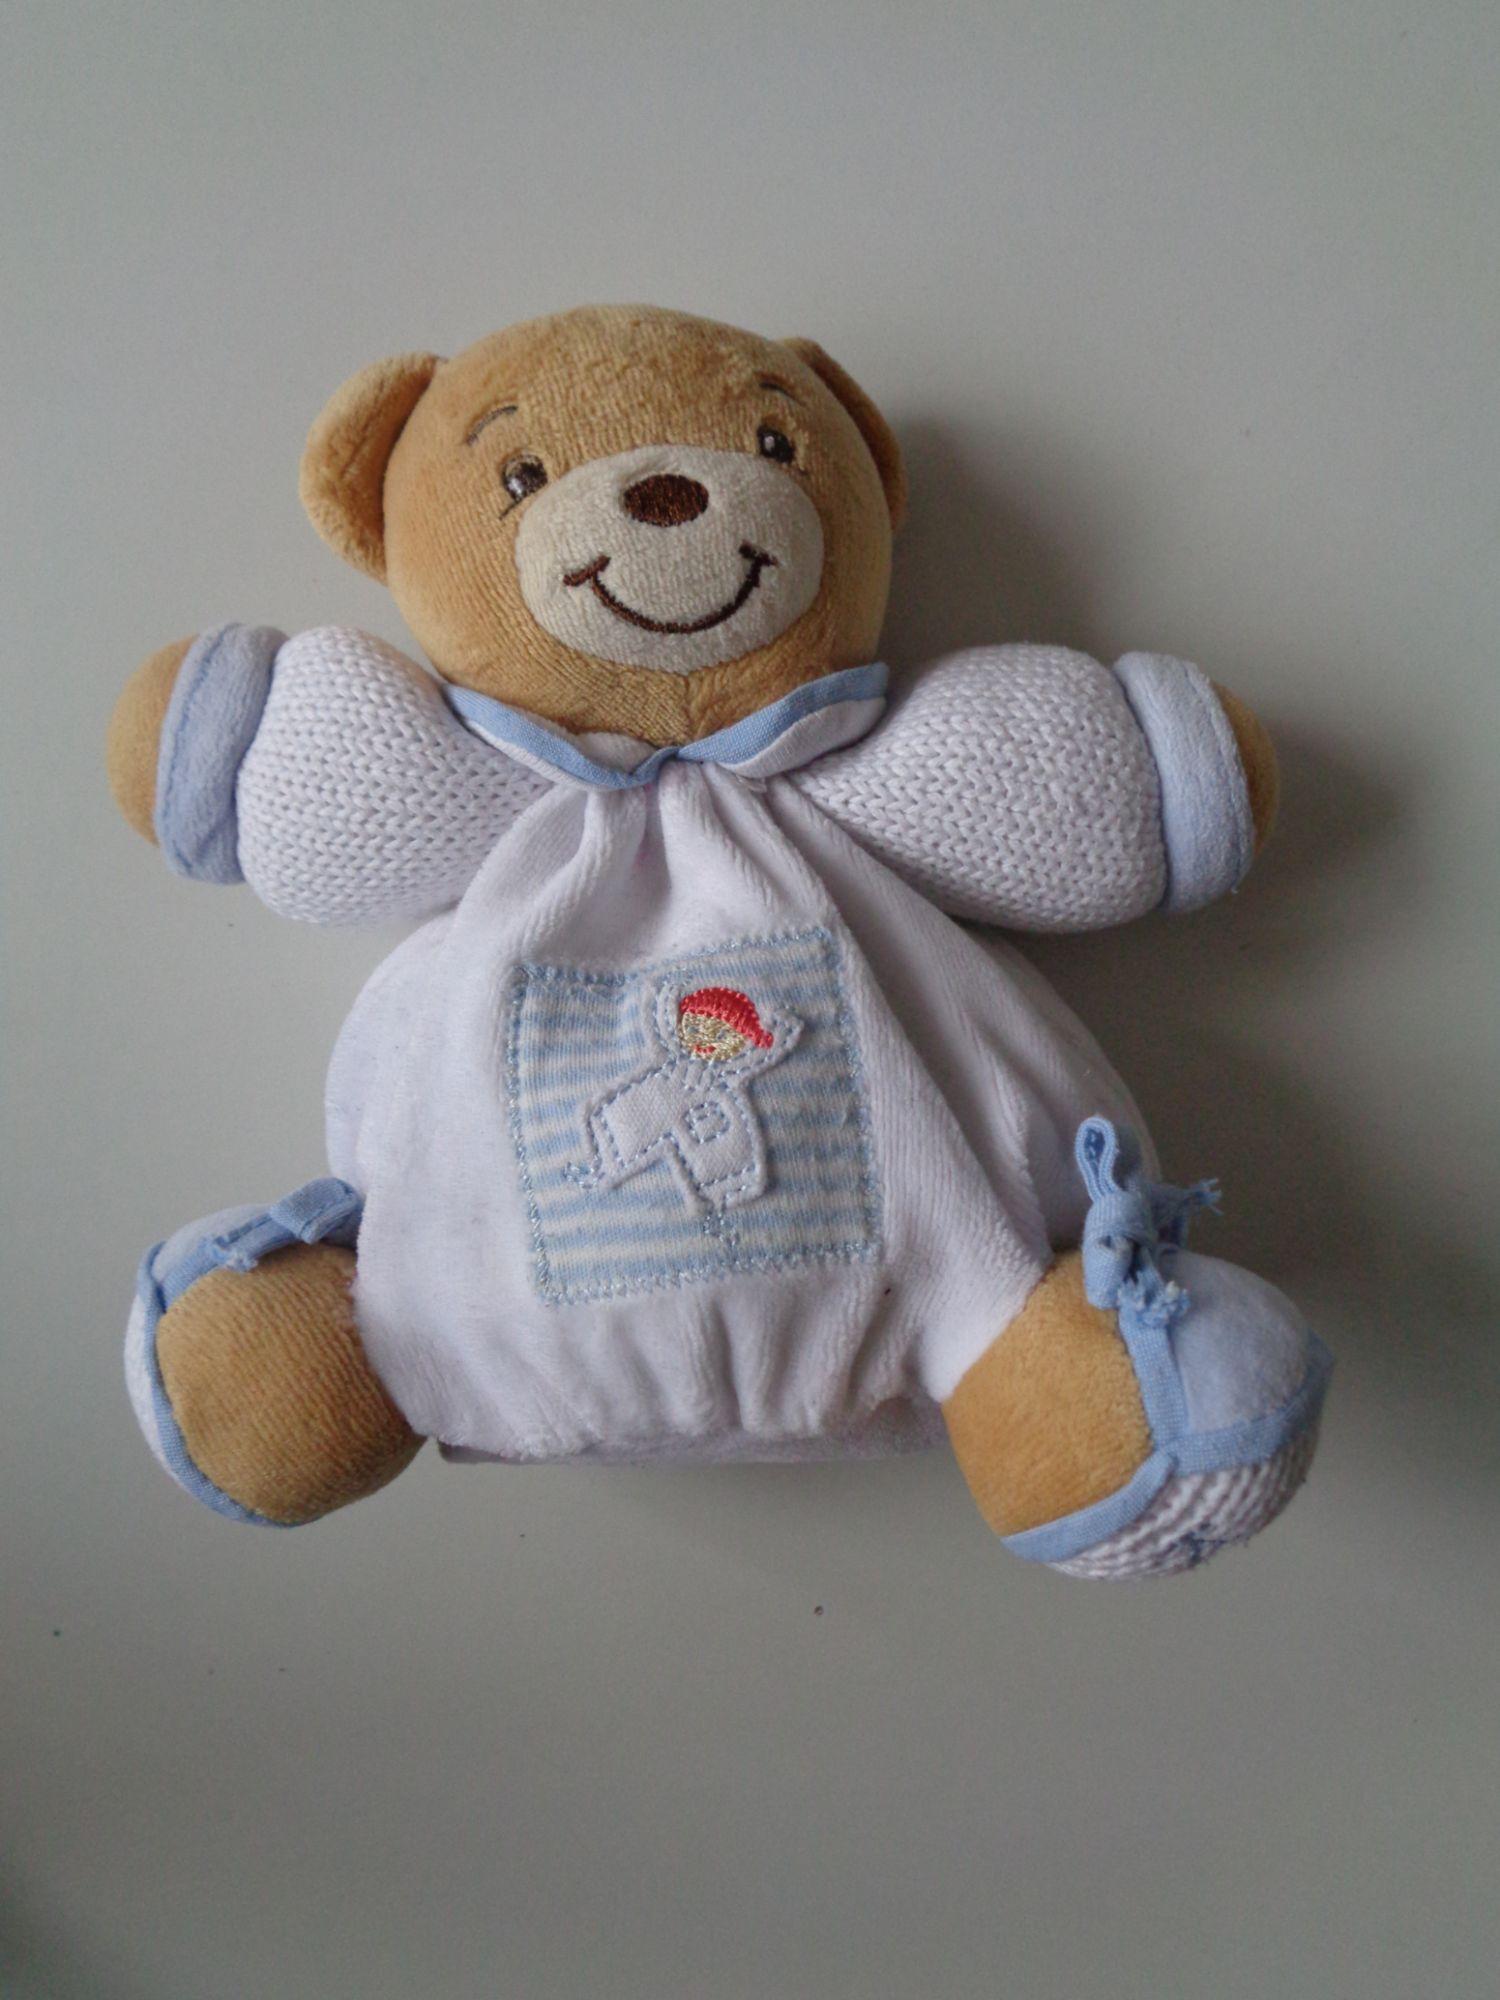 Doudou ours rose - Peluche ours moelleuse - Kaloo